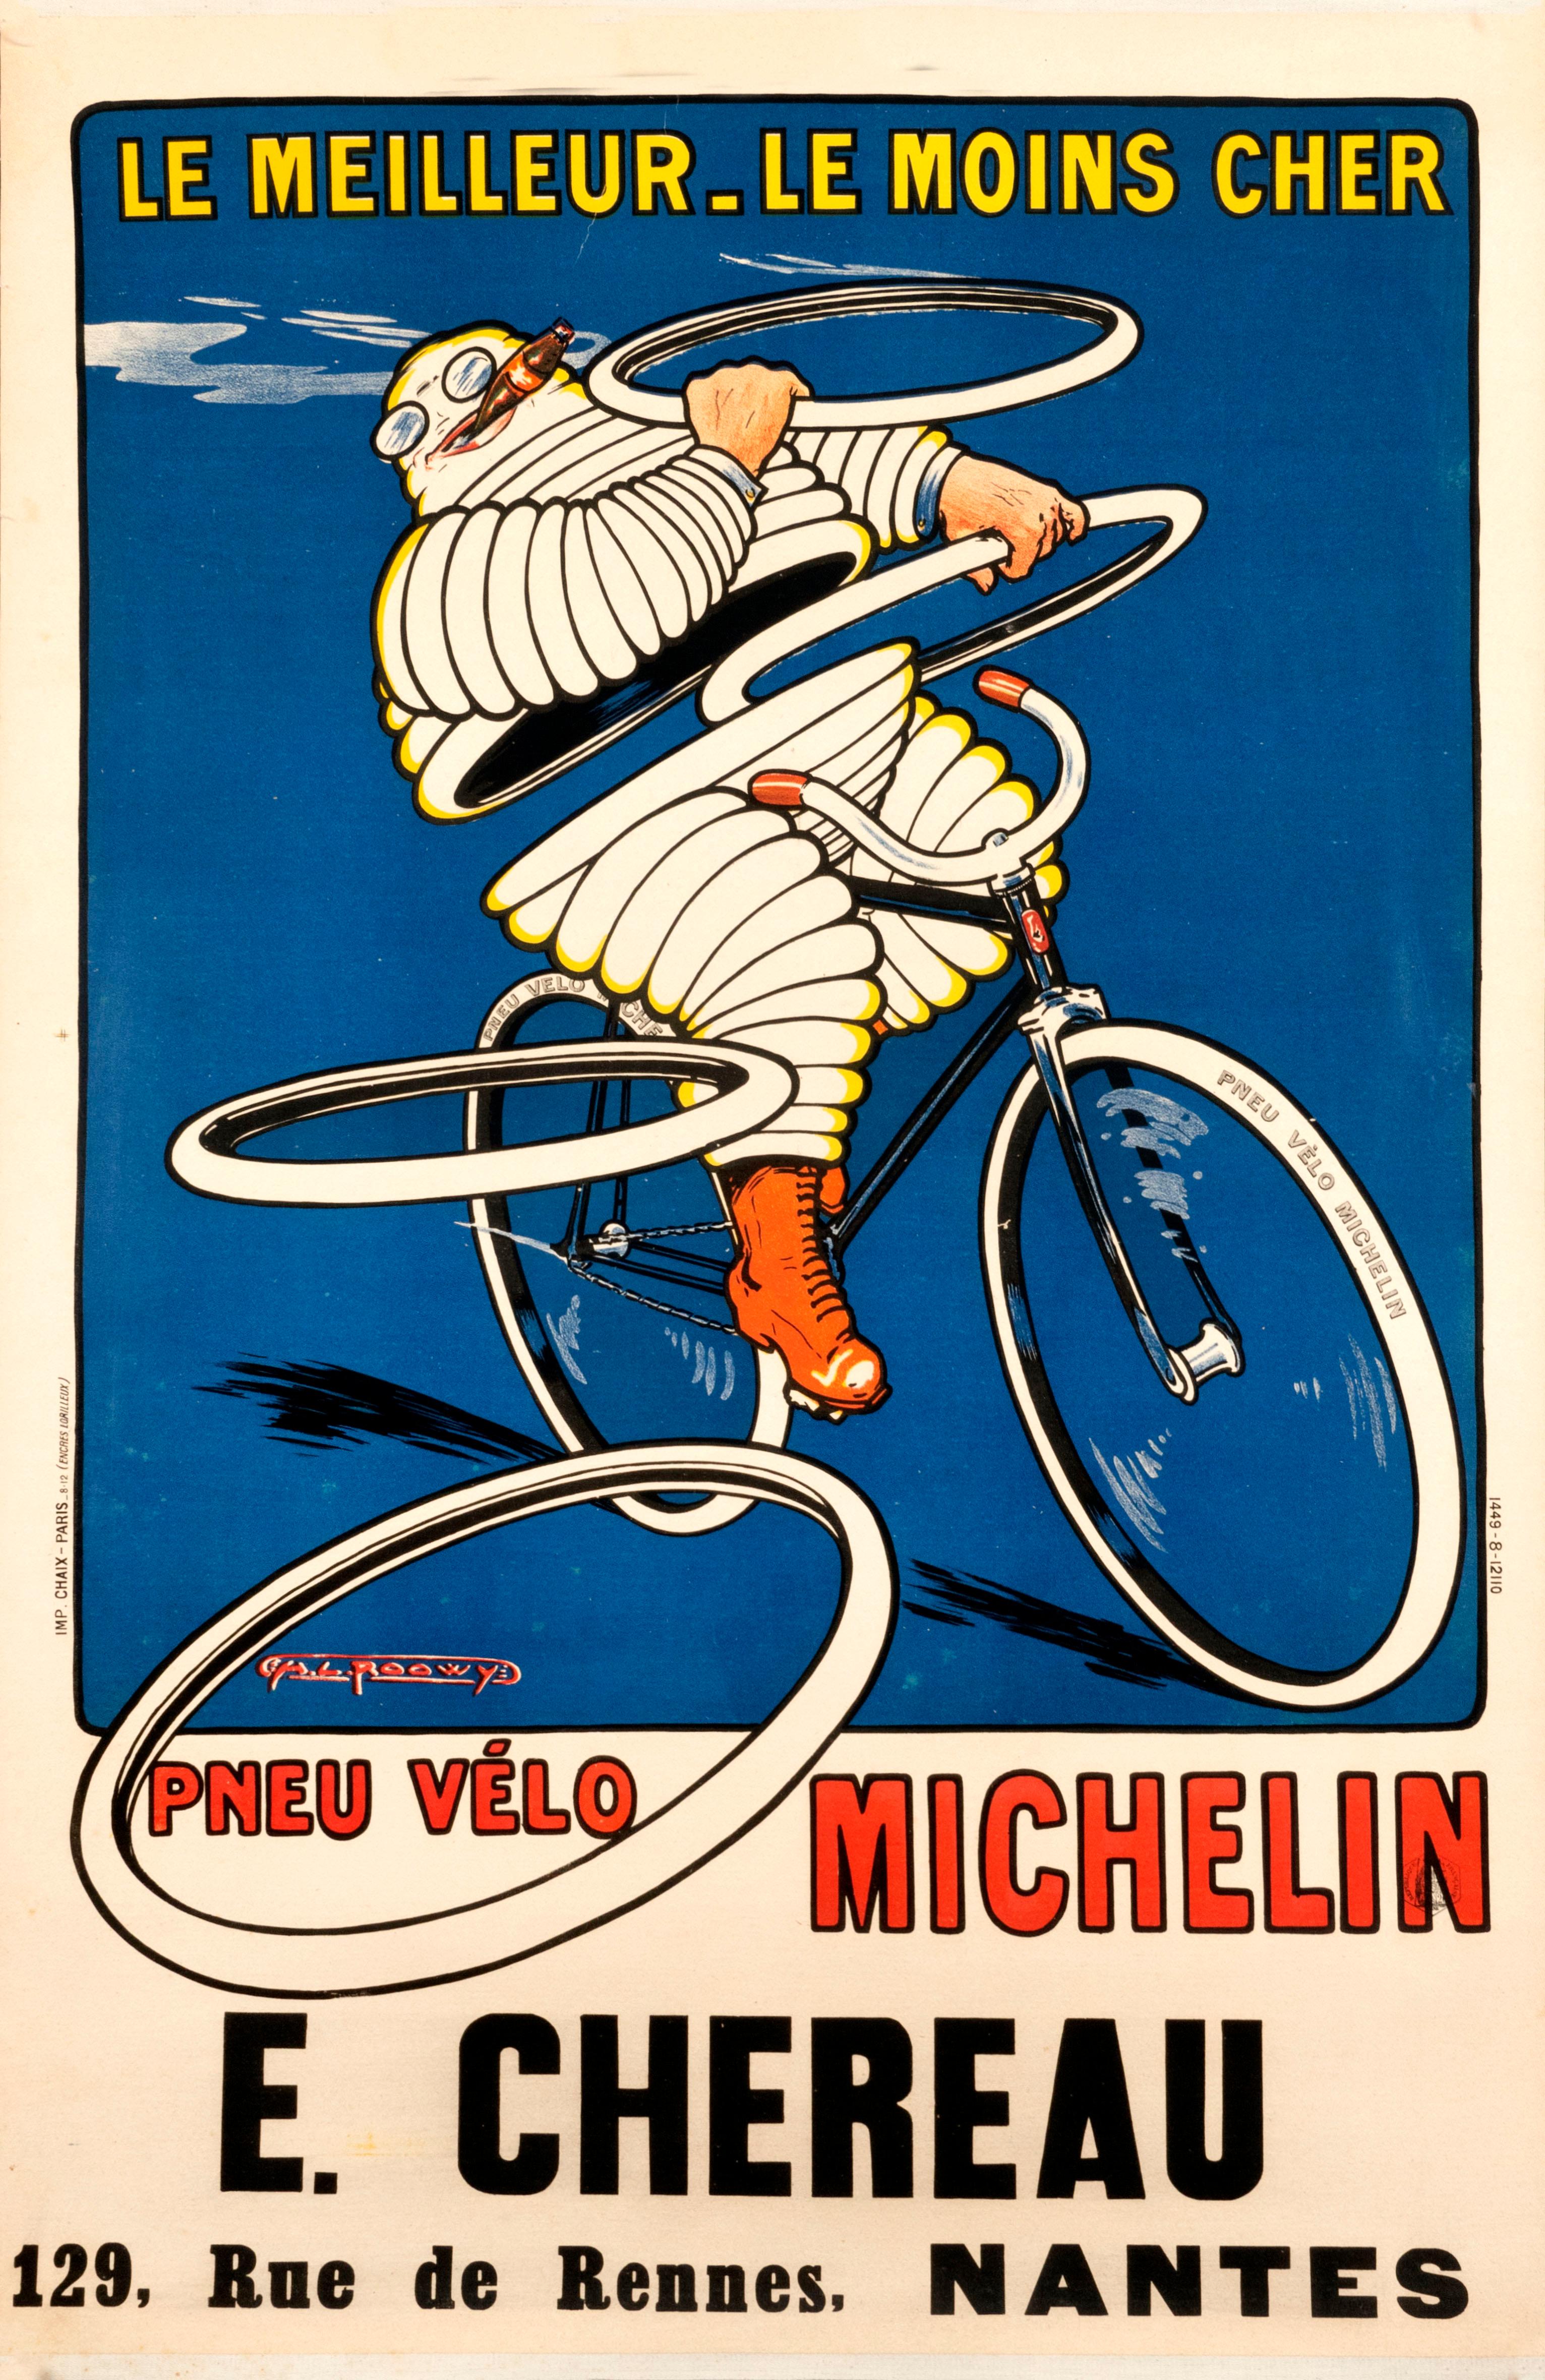 Antique Michelin Man - 2 For Sale on 1stDibs | michilin man, michelan man,  michellin man